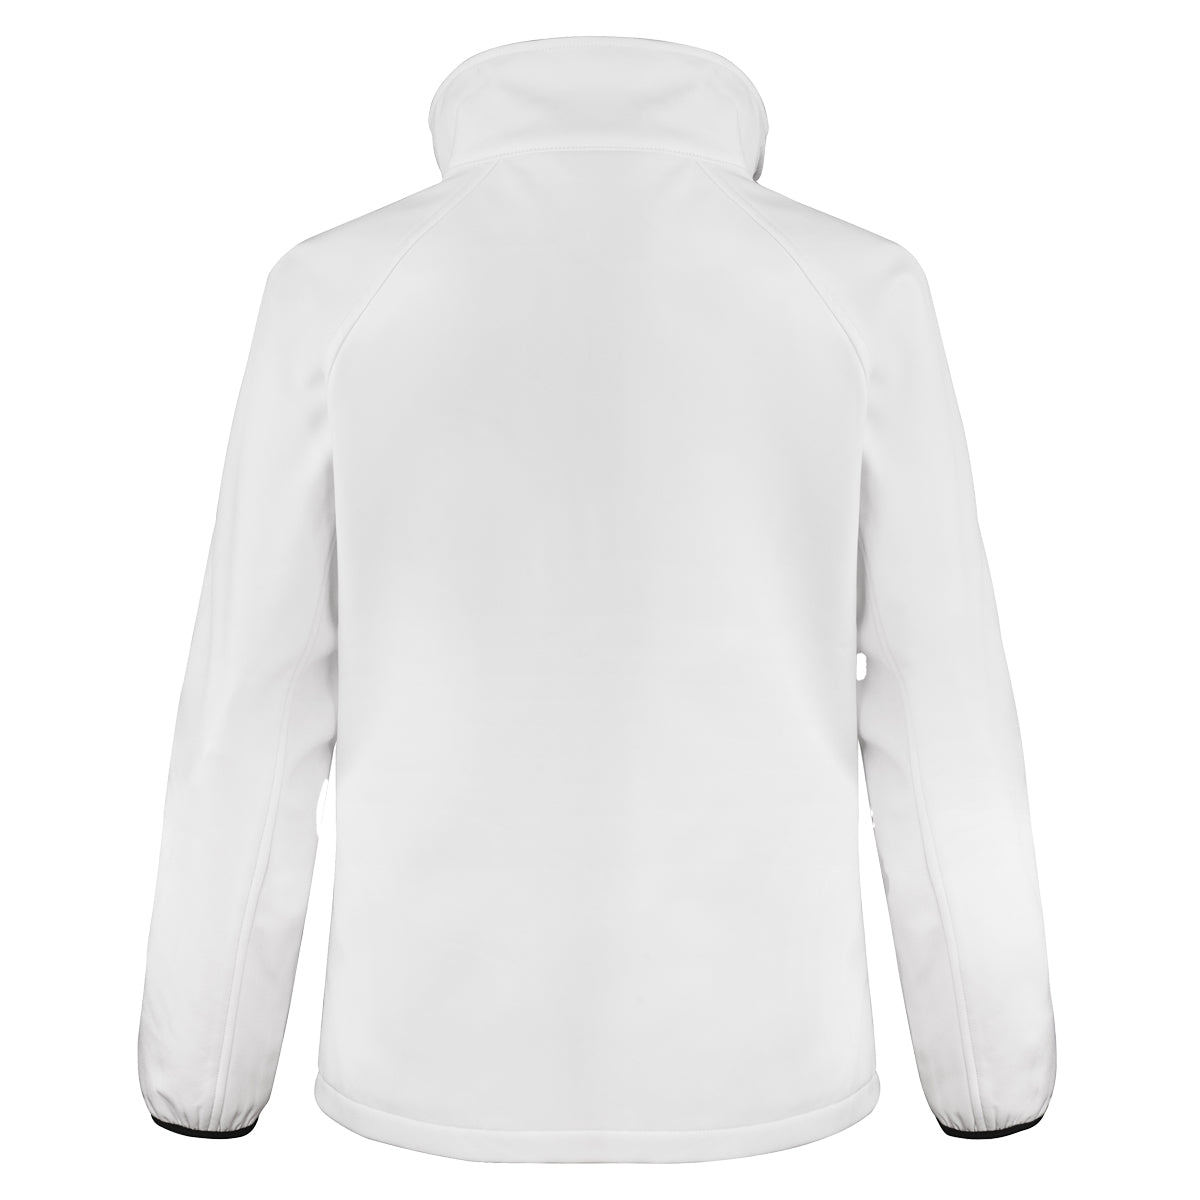 Photo of the Carrickmines LTC Men's Softshell Jacket in White, back